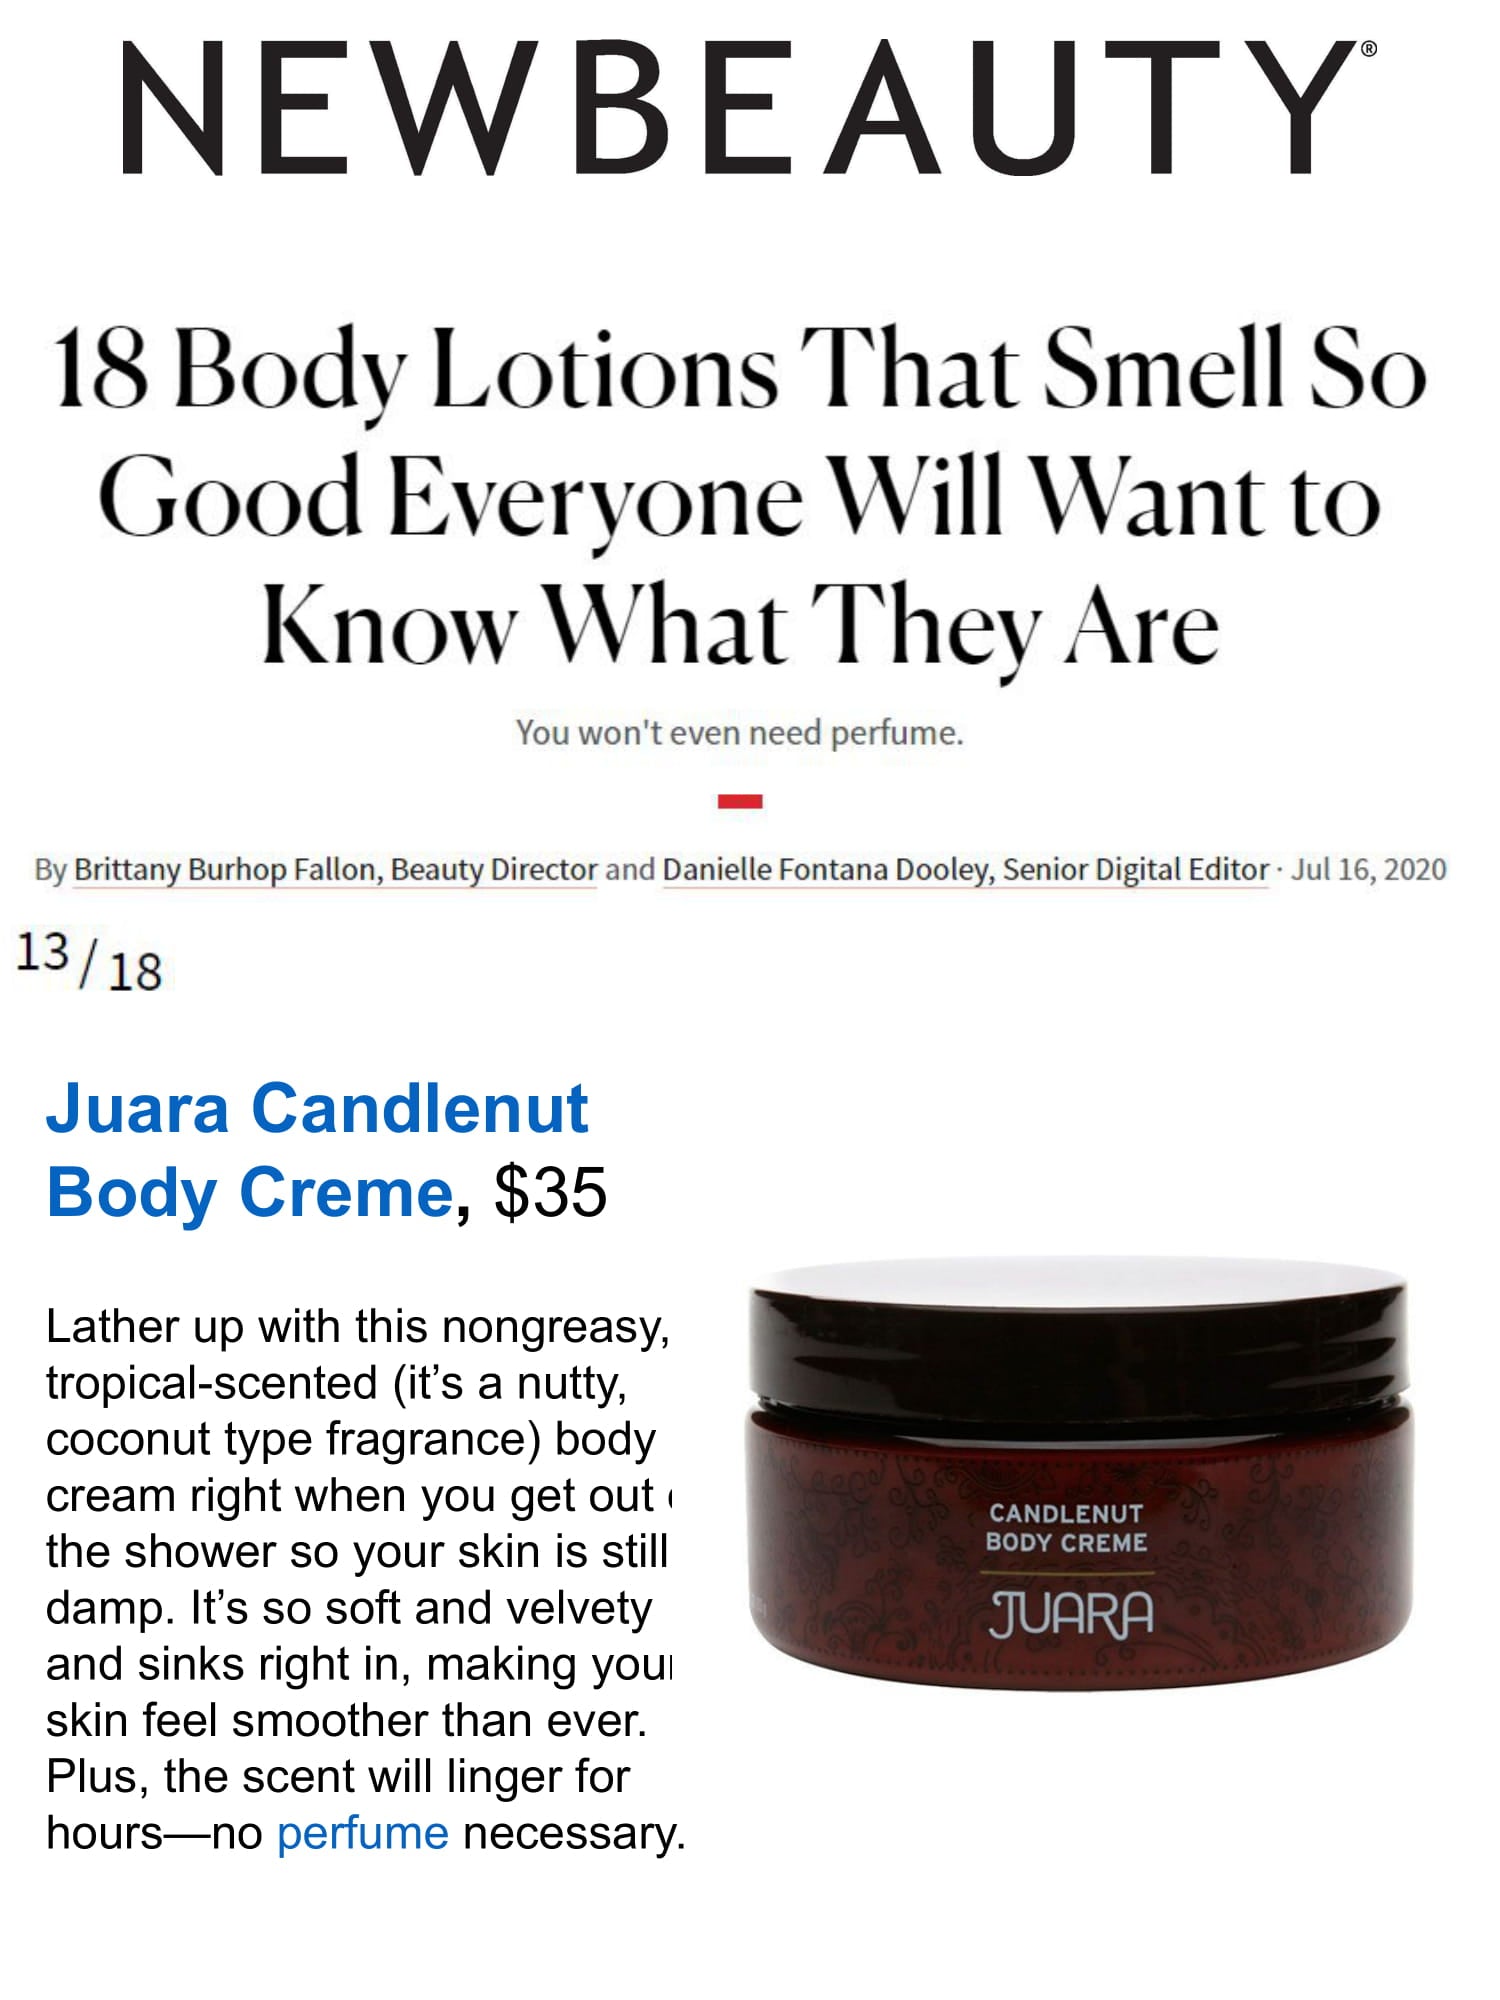 NEW BEAUTY: 18 Body Lotions That Smell So Good Everyone Will Want to Know What They Are JUARA Skincare